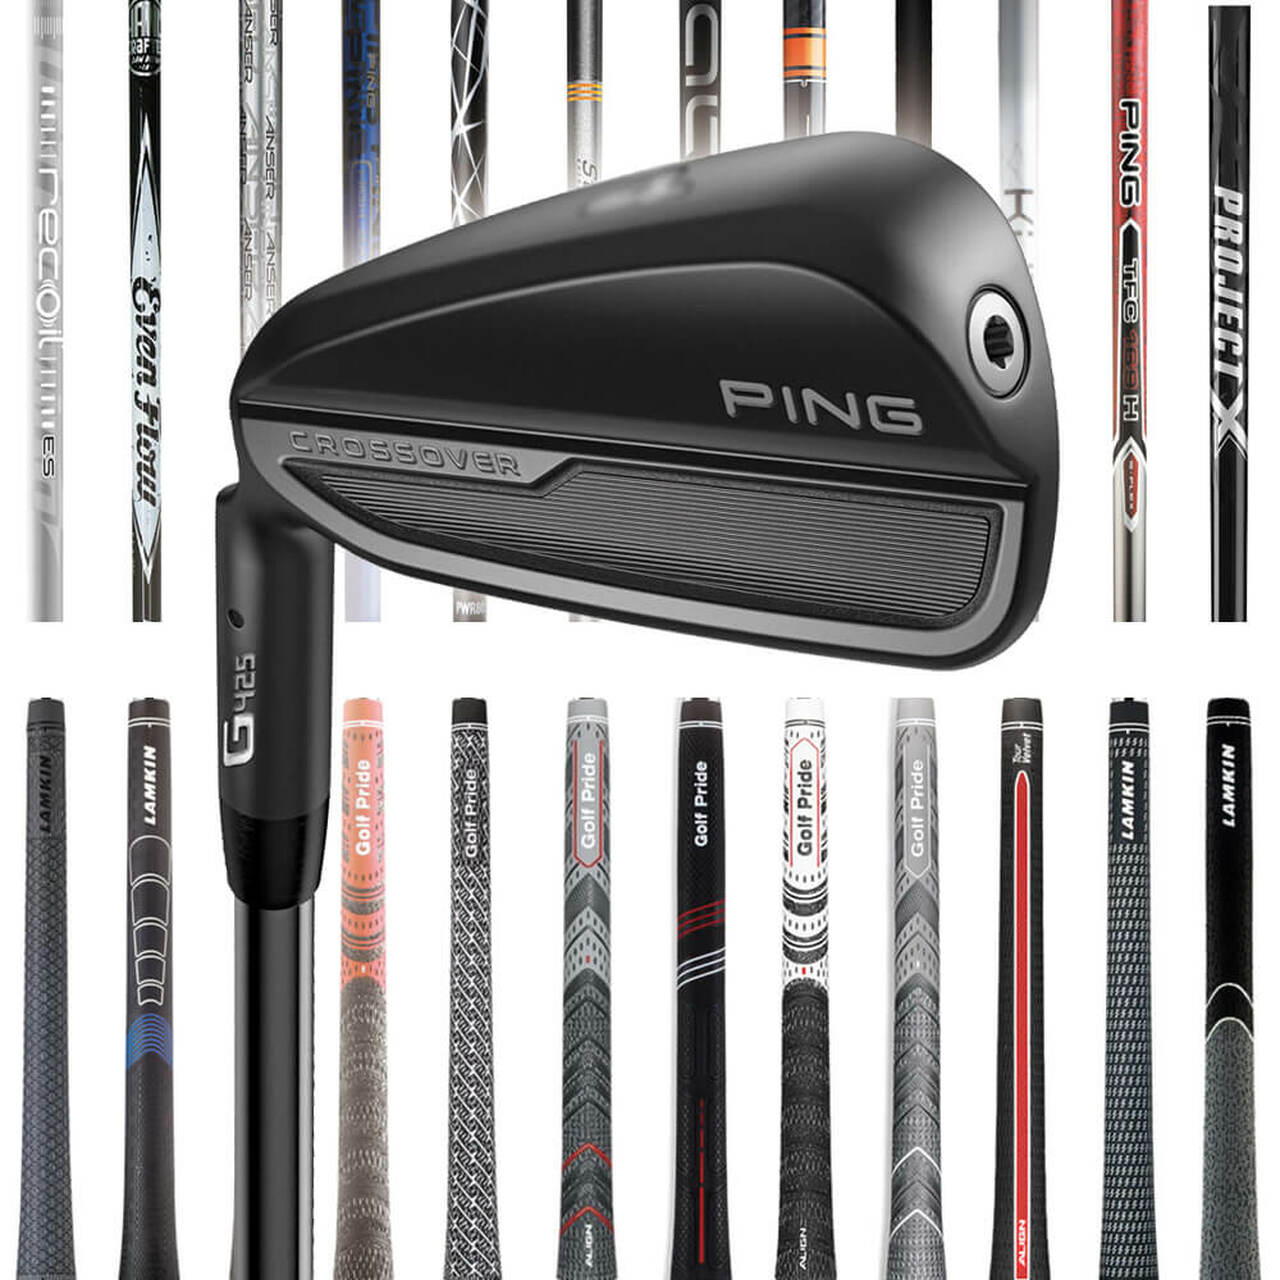 PING G425 Crossover Custom Utility Irons